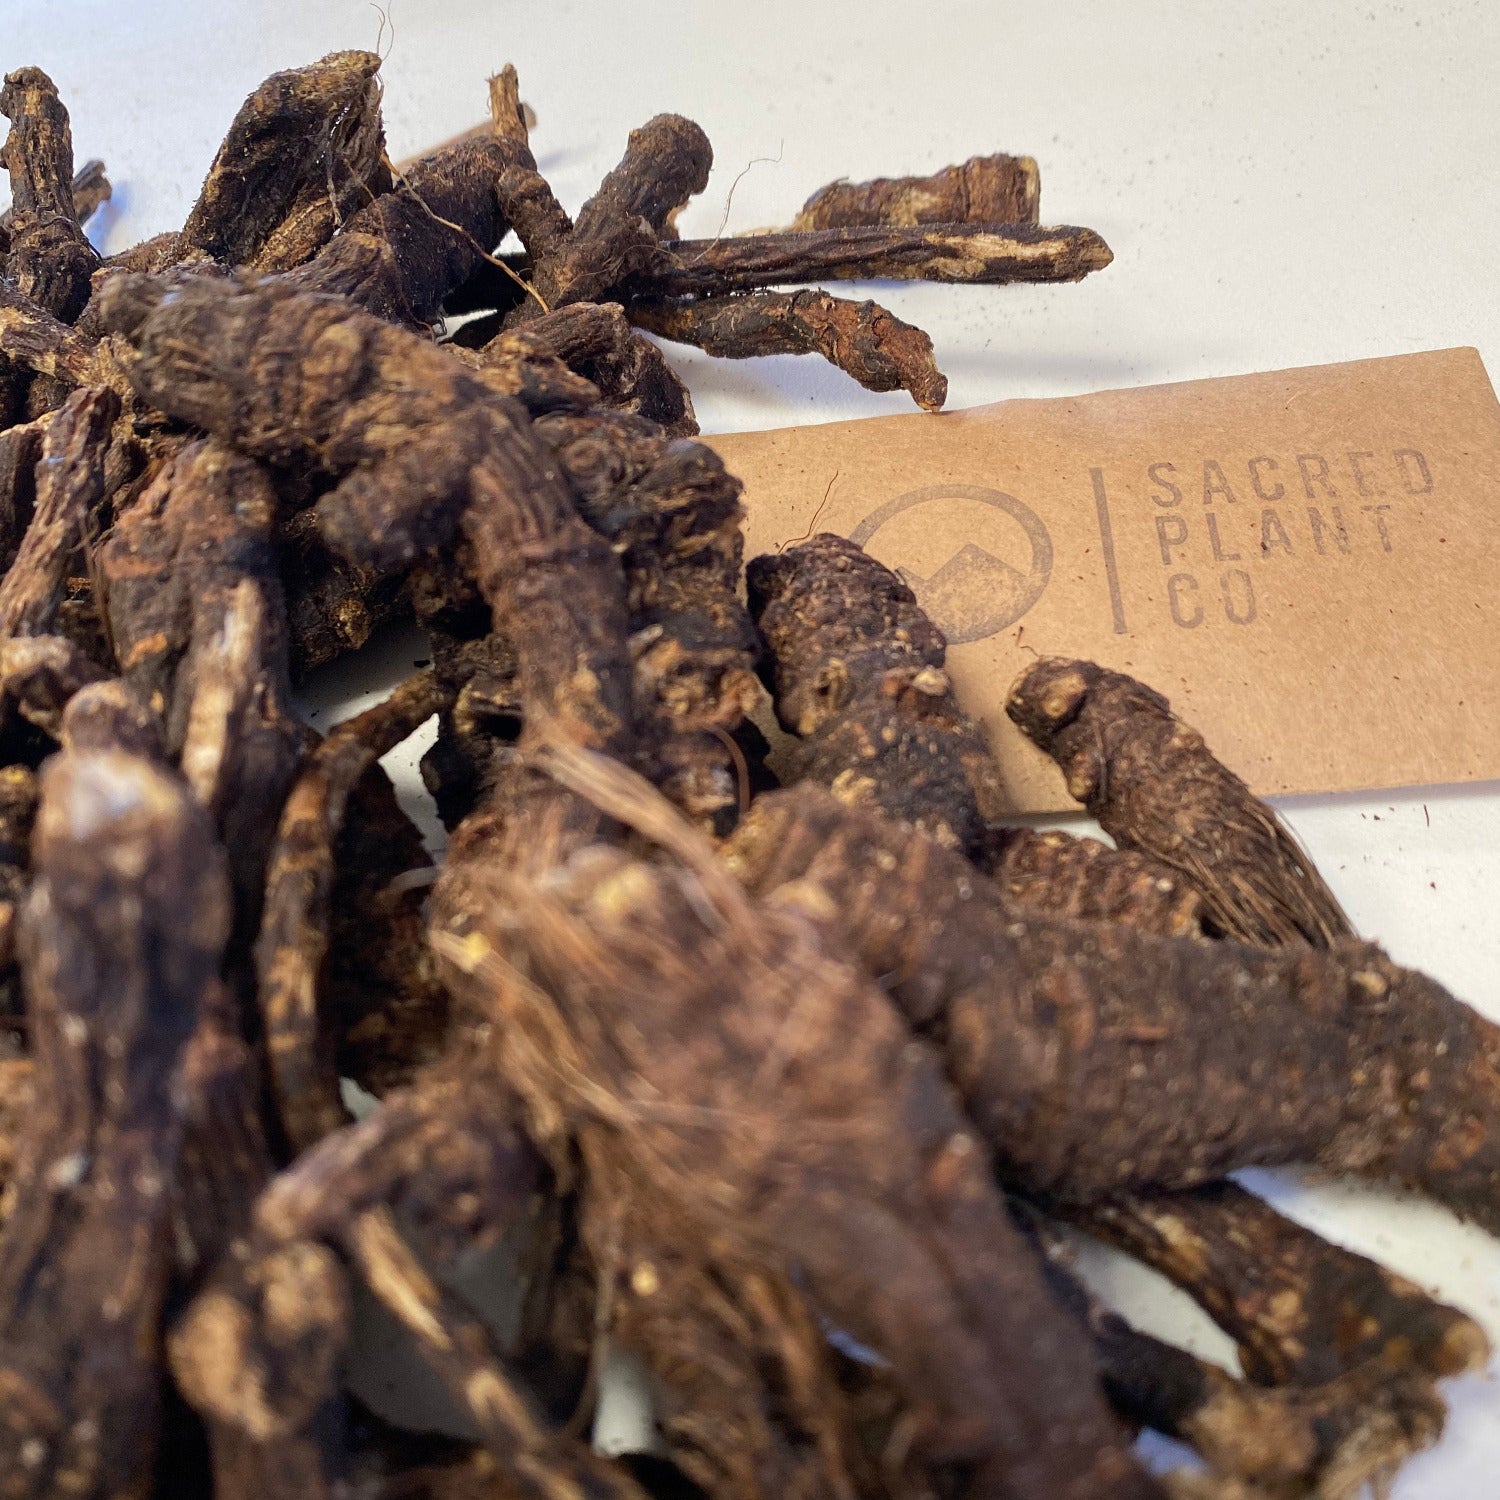 High-quality Osha Root provided by Sacred Plant Co, with a focus on the herbal texture and natural presentation for sale.